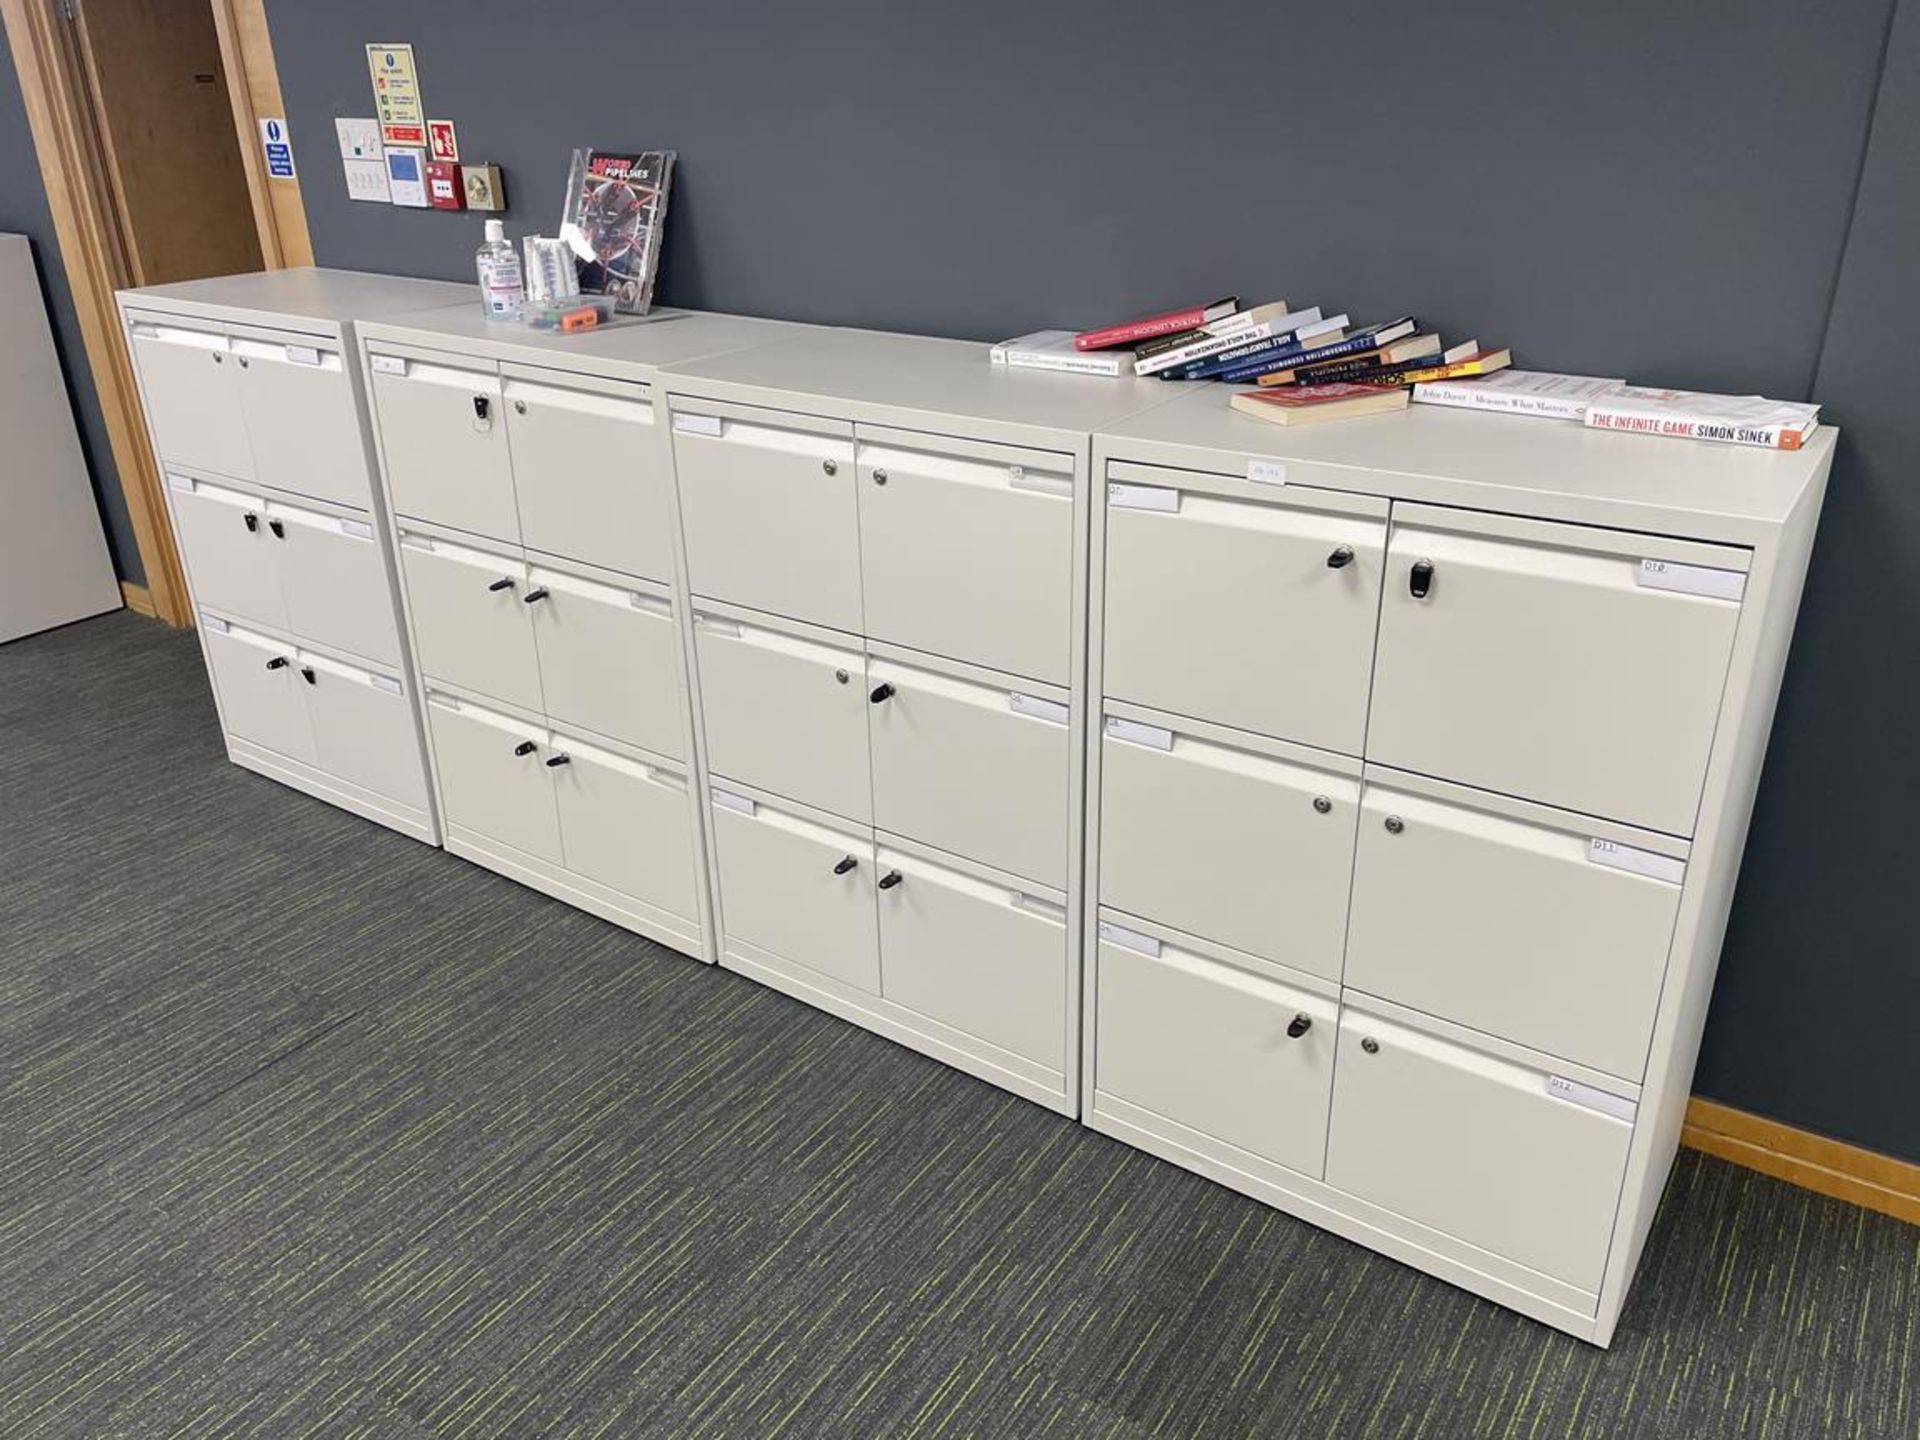 5x Banks of Lockable Steel 6-Drawer Filling Cabinets (GB REF#133)